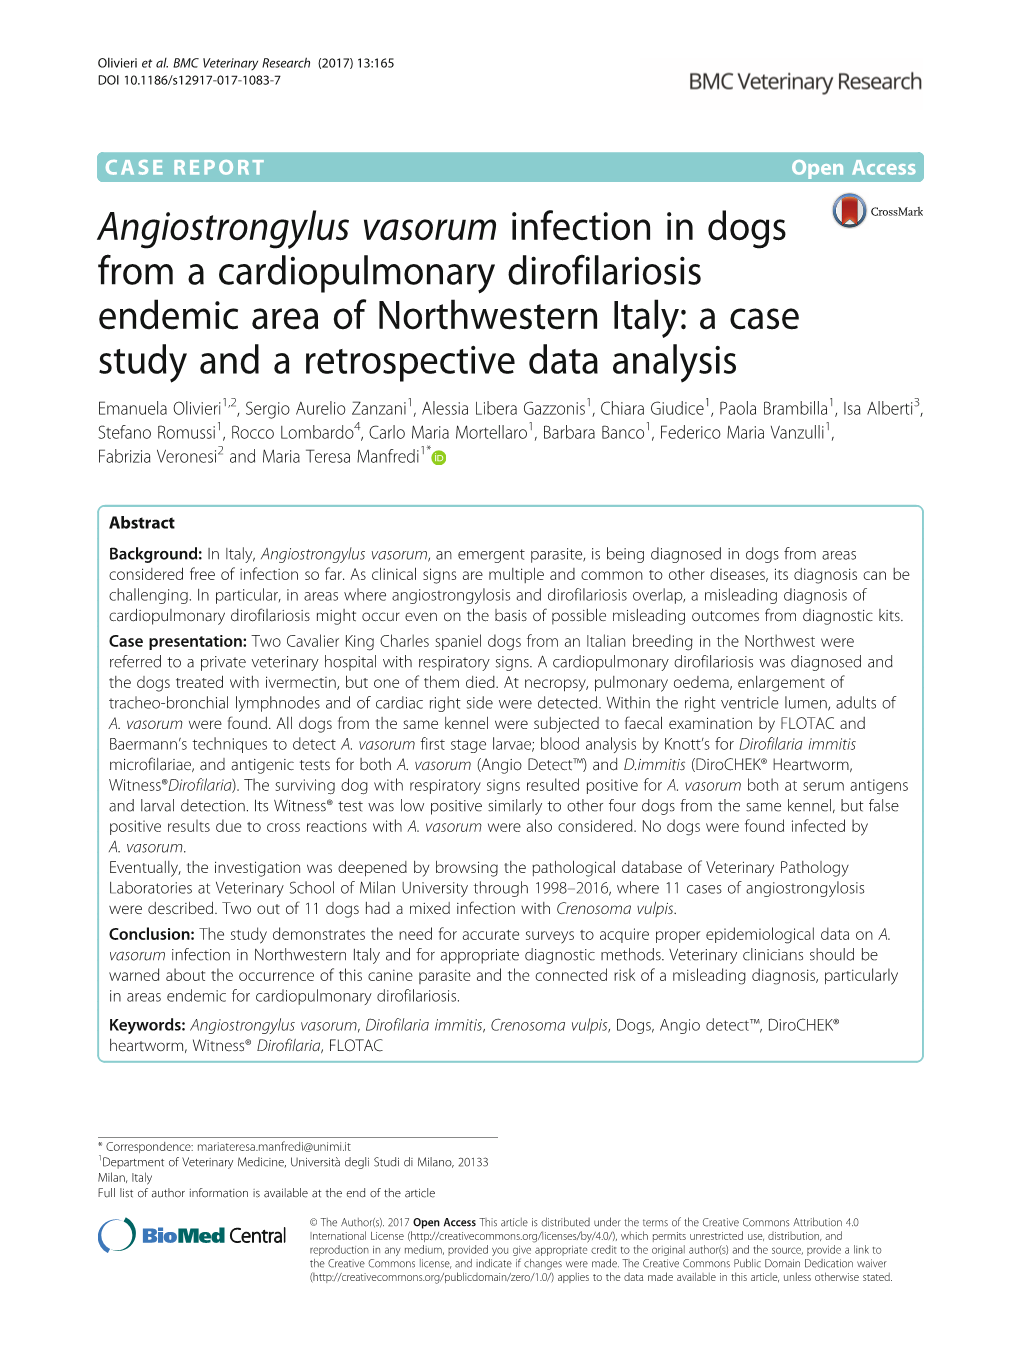 Angiostrongylus Vasorum Infection in Dogs from a Cardiopulmonary